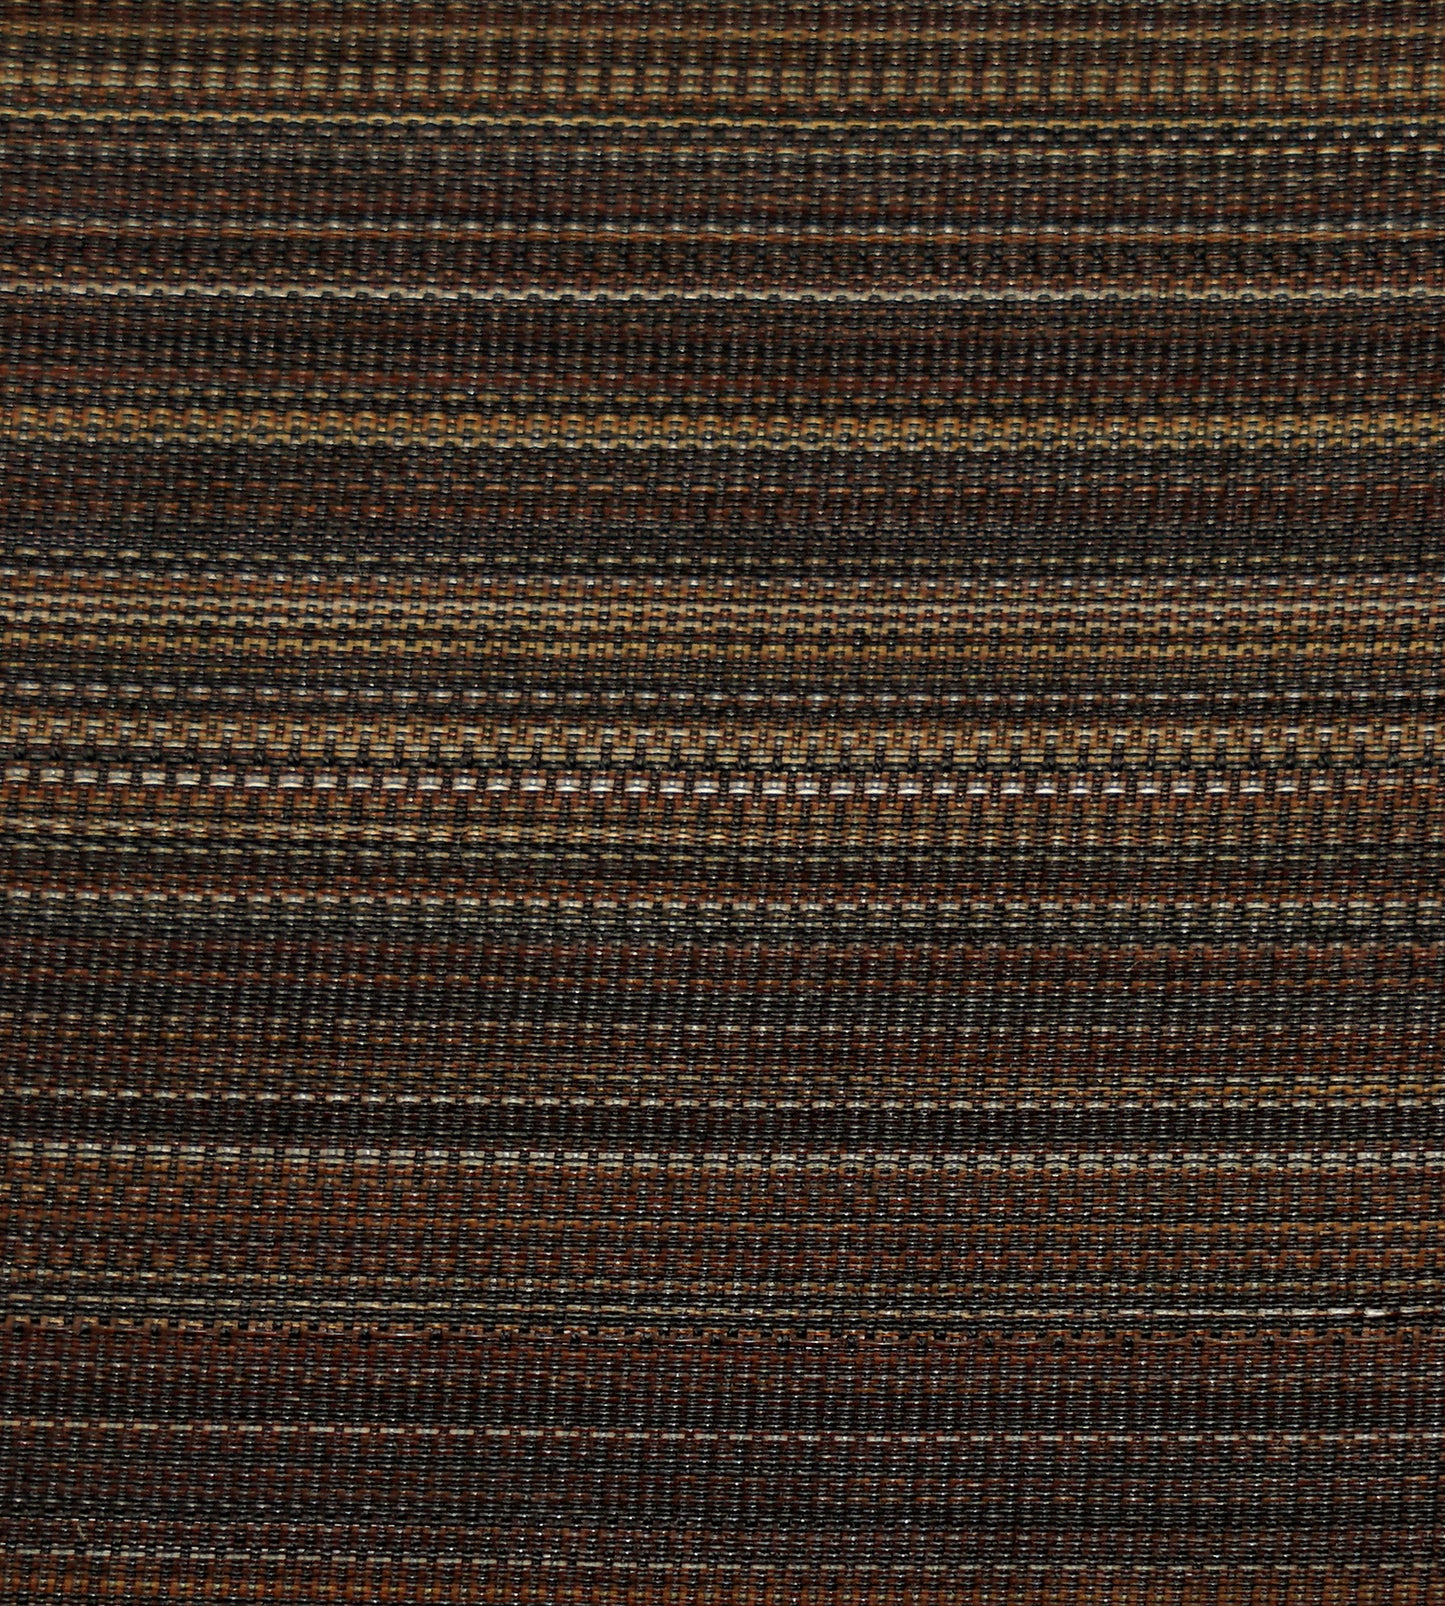 Purchase Old World Weavers Fabric Product SK 00010518, Paso Horsehair Brown / Tan 1